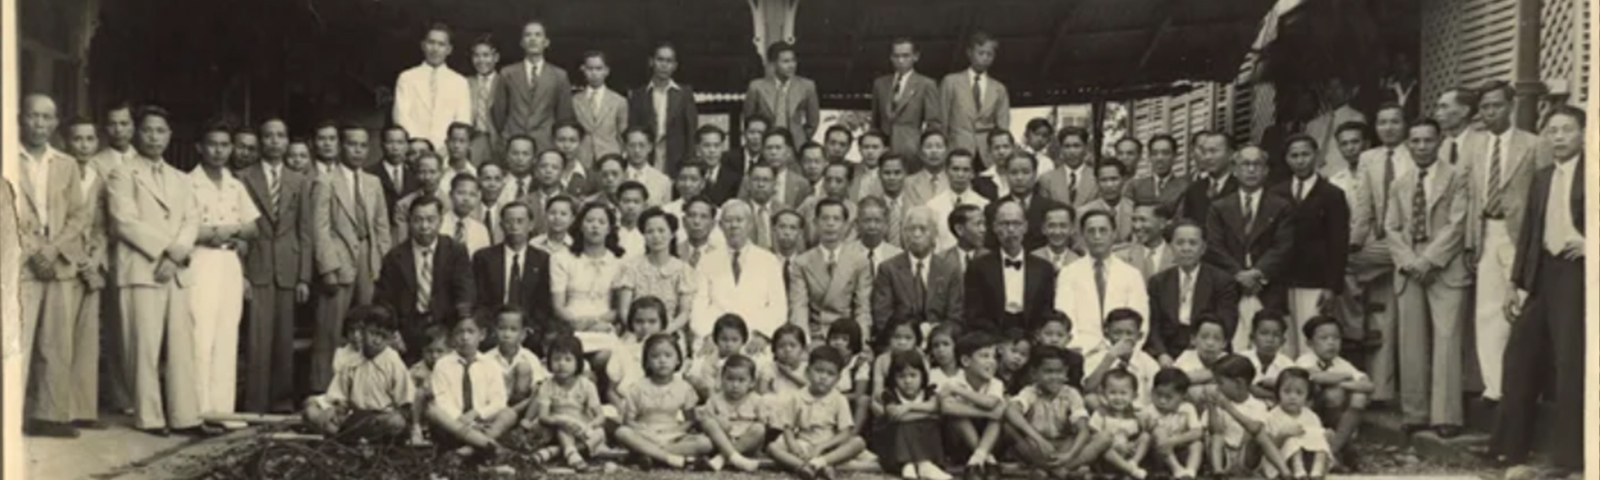 The opening ceremony of the Chinese School in Port-of-Spain, Trinidad (January 1943). Chen Jiaxian played a key role in bringing together those in Nationalist China and the Caribbean region.